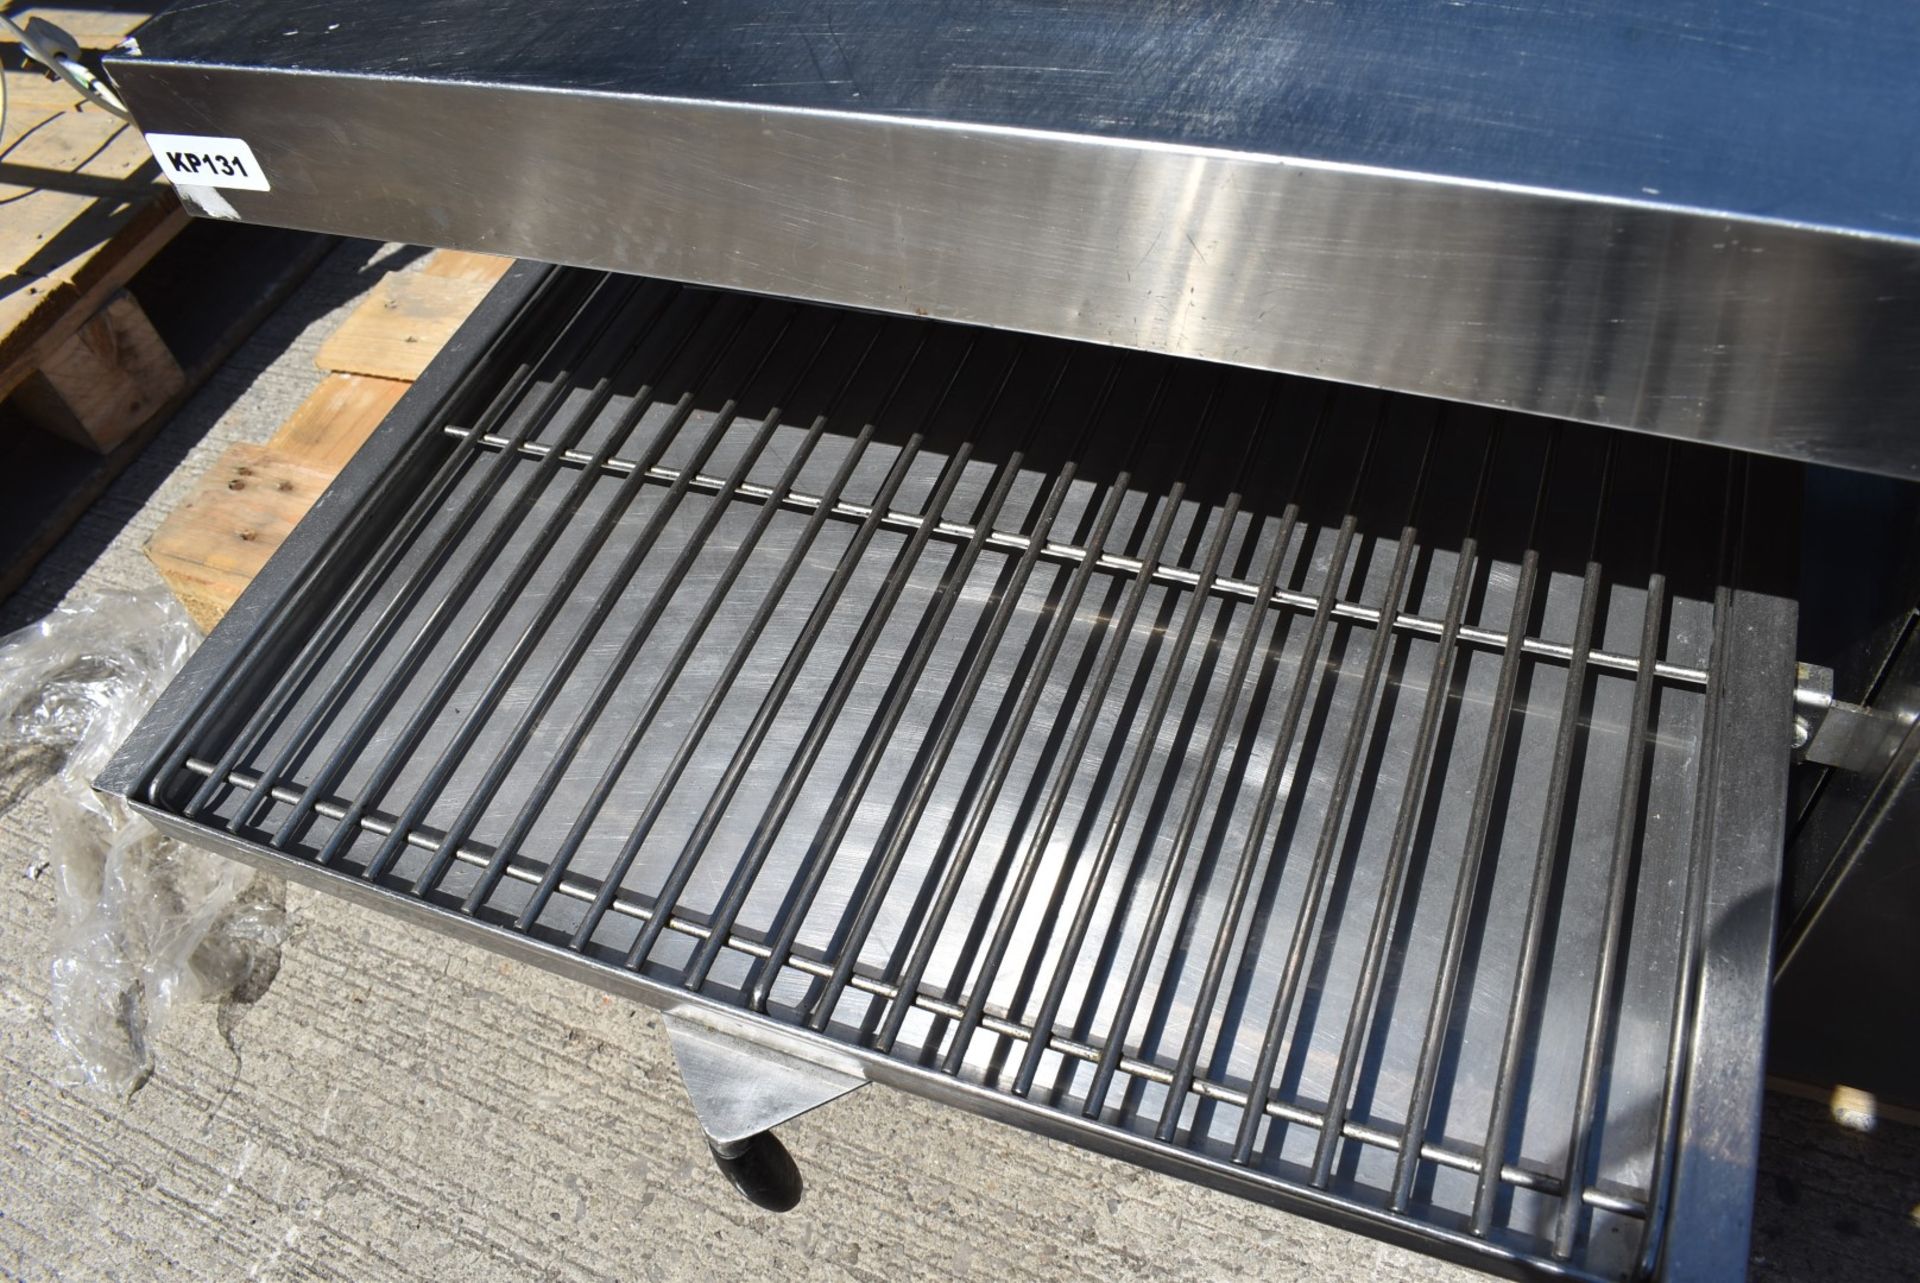 1 x MBM Sel2/0 Commercial Rise and Fall Salamander Grill - Stainless Steel Exterior - 3 Phase 400v - - Image 3 of 7